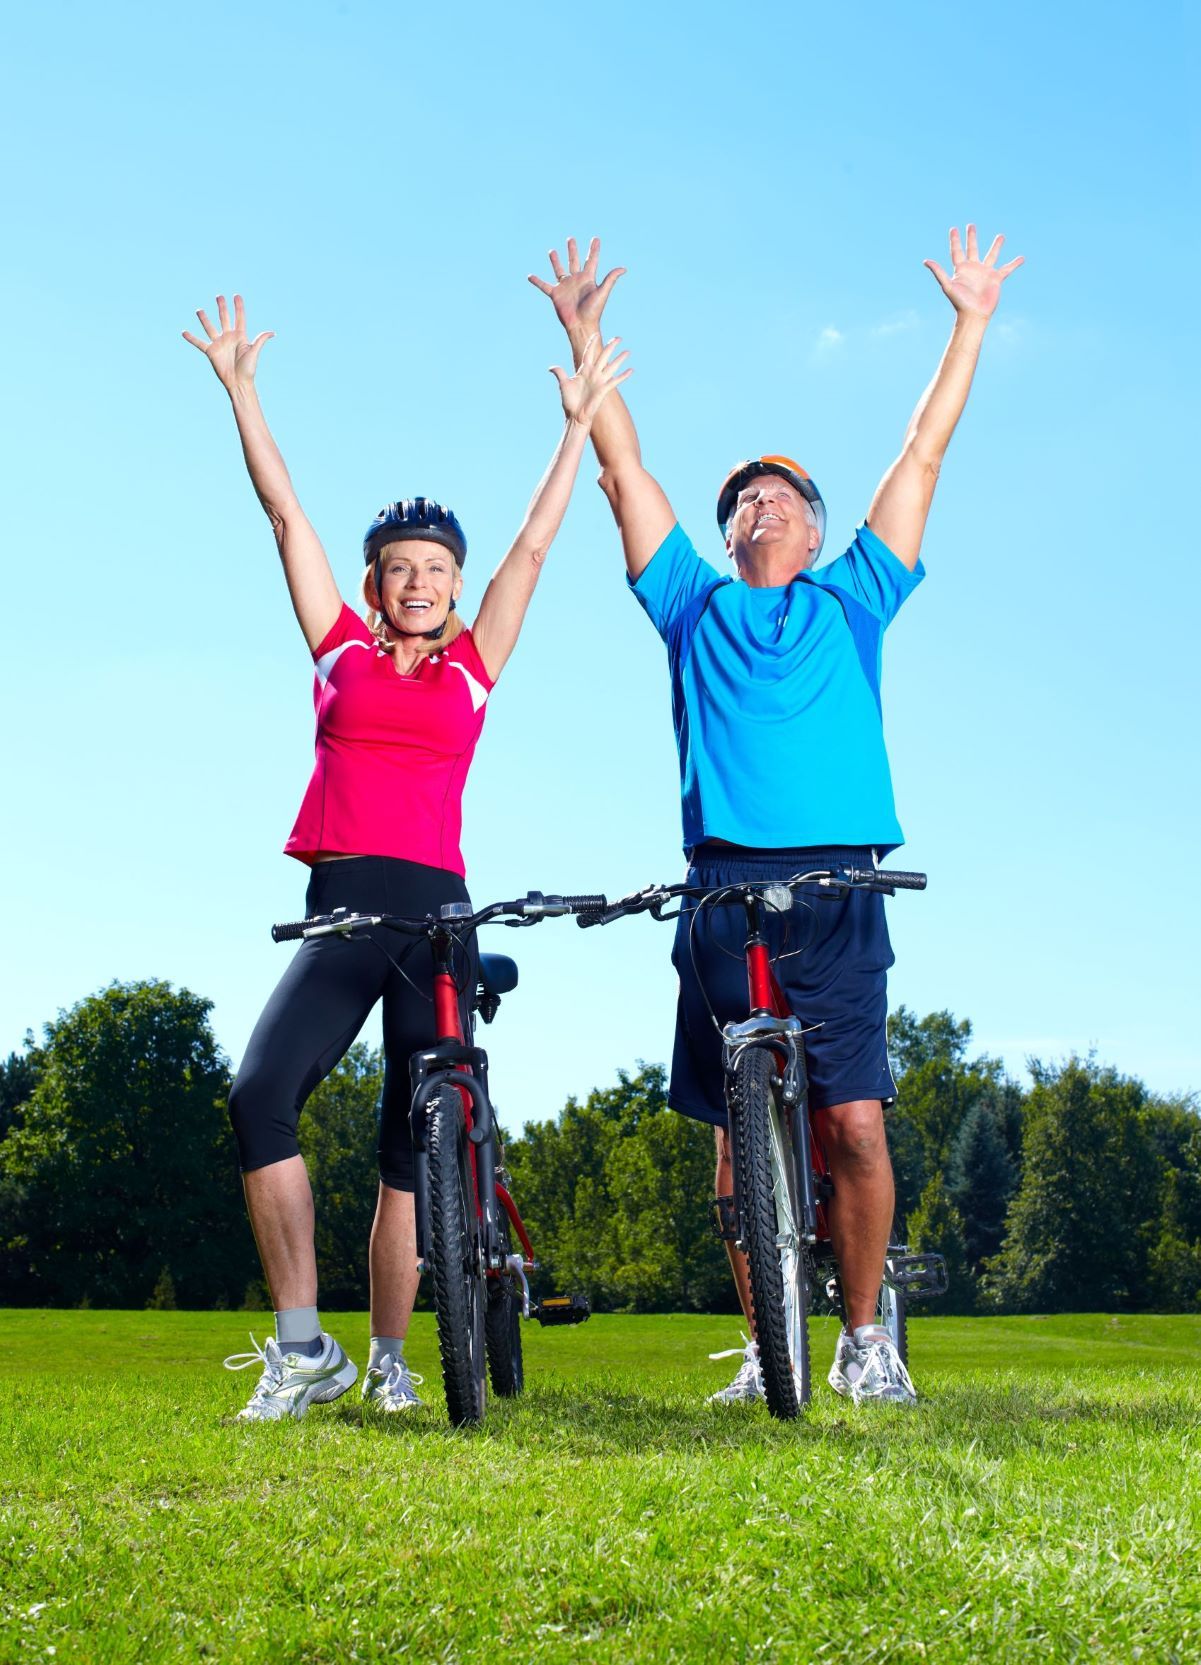 Cycling is a great way to stay healthy and upbeat